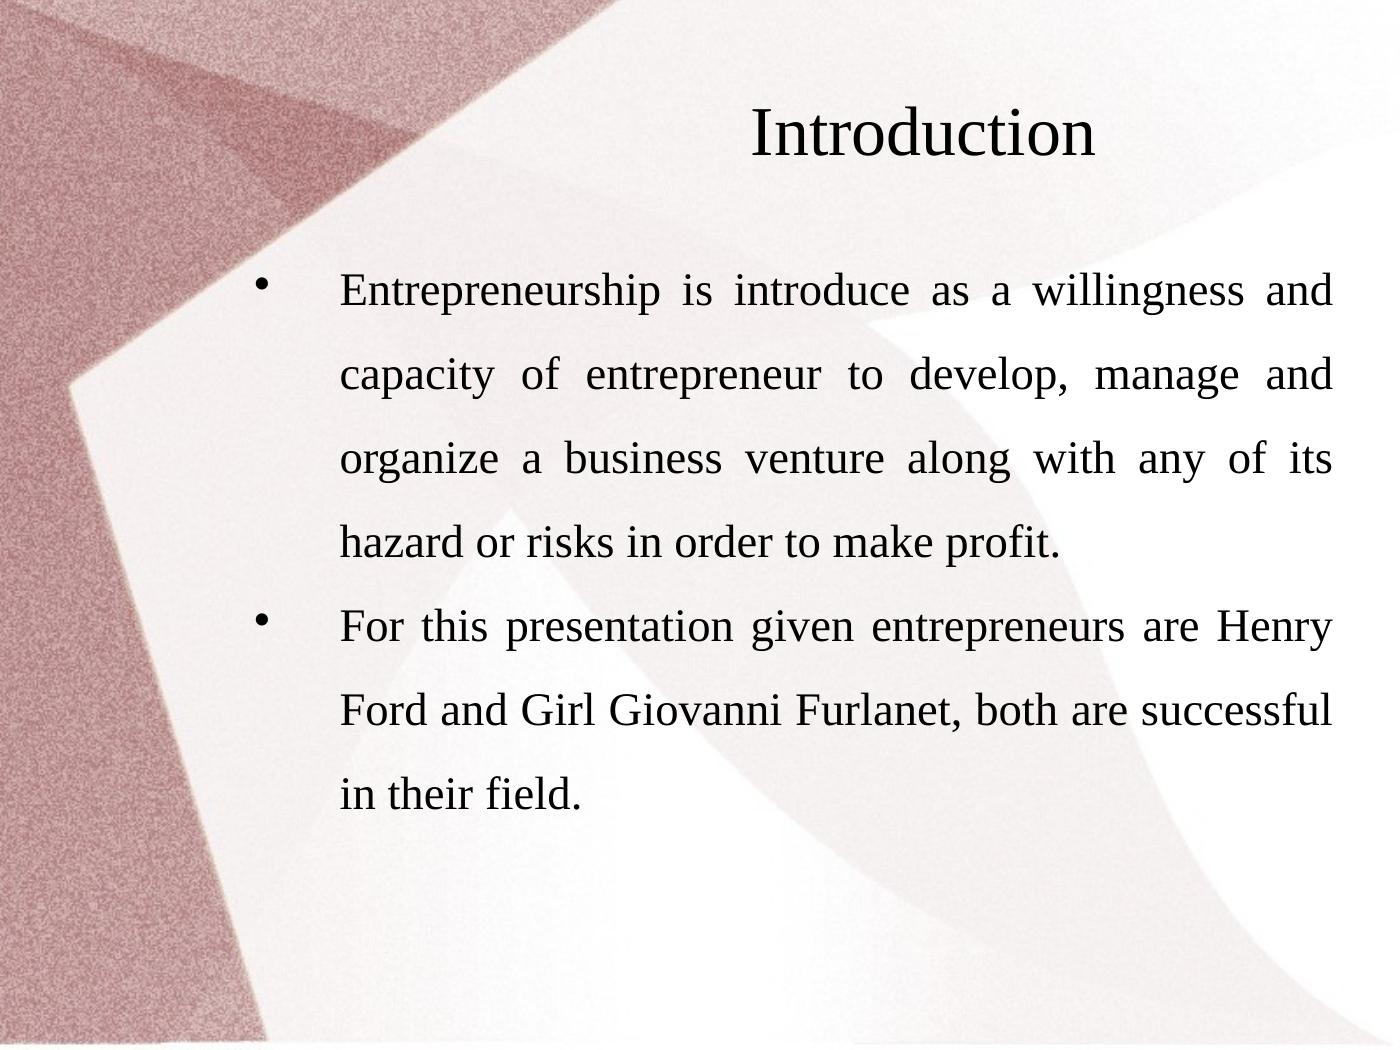 Entrepreneurship and Small Business Management_4